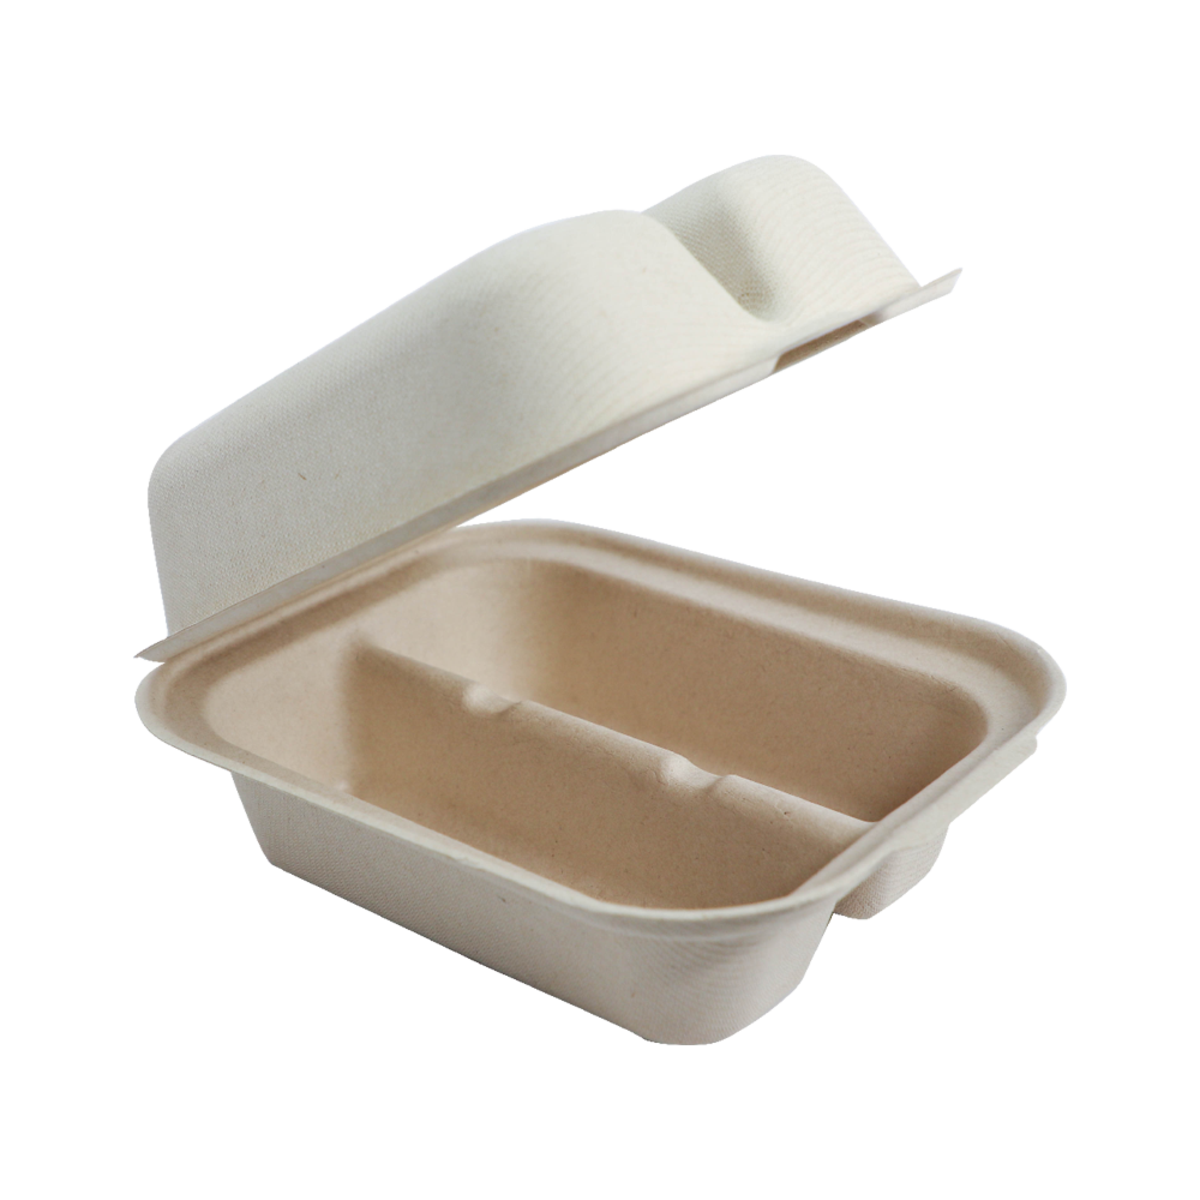 8"x 5"x 3" Taco Box Clamshell 2 Compartment | Natural Plant Fiber (Pack of 200)